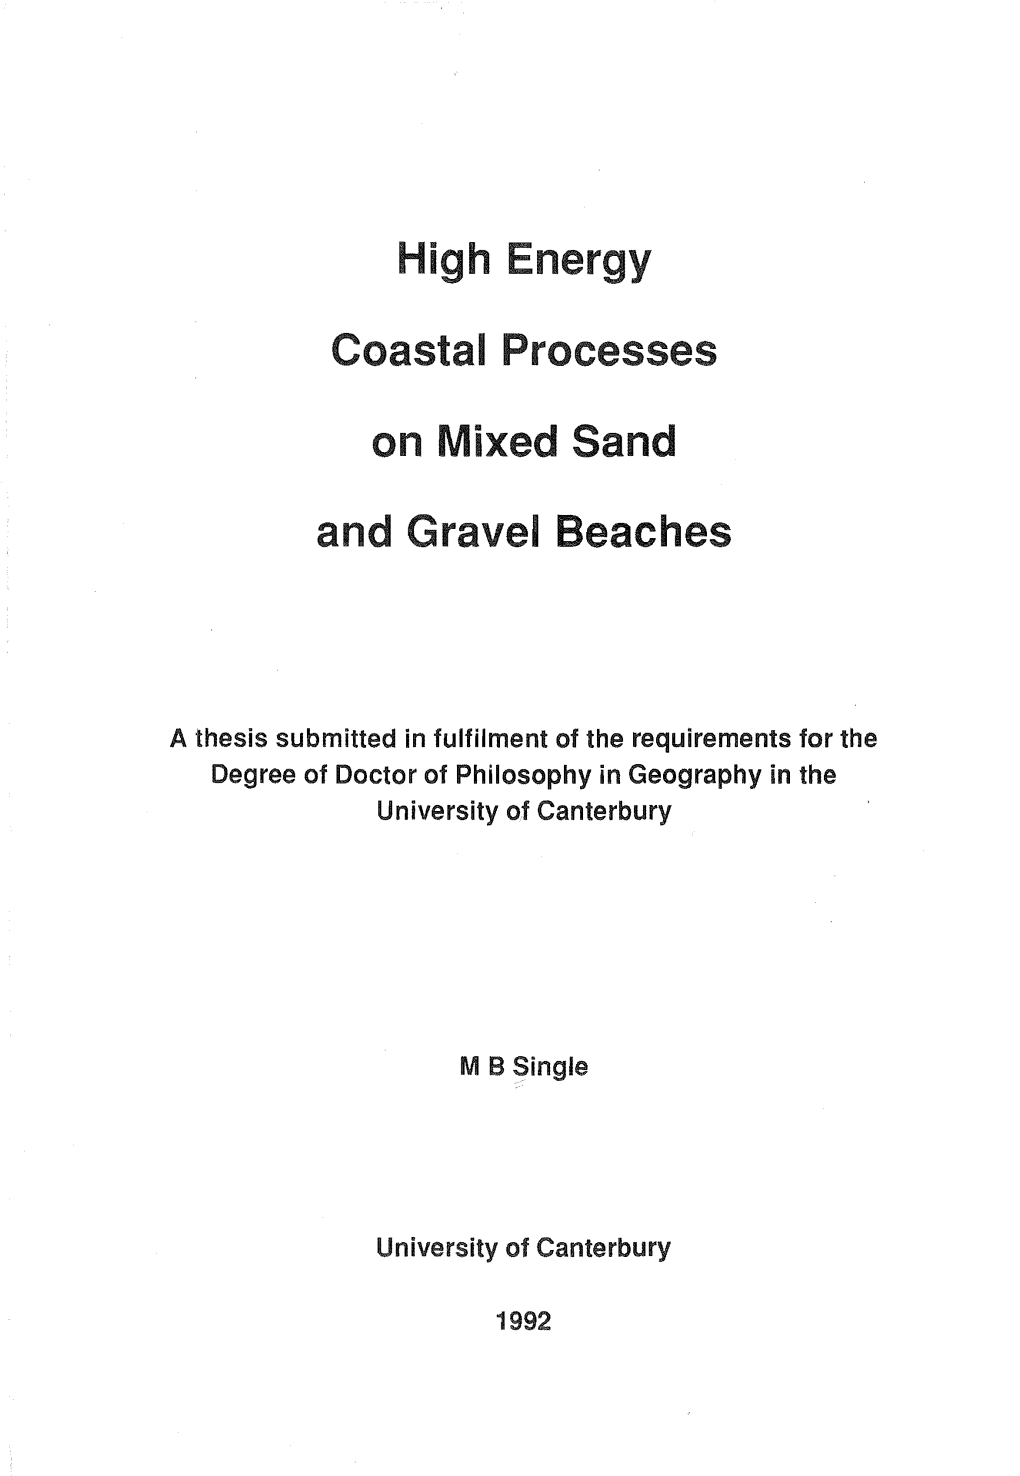 High Energy Coastal Processes on Mixed Sand and Gravel Beaches